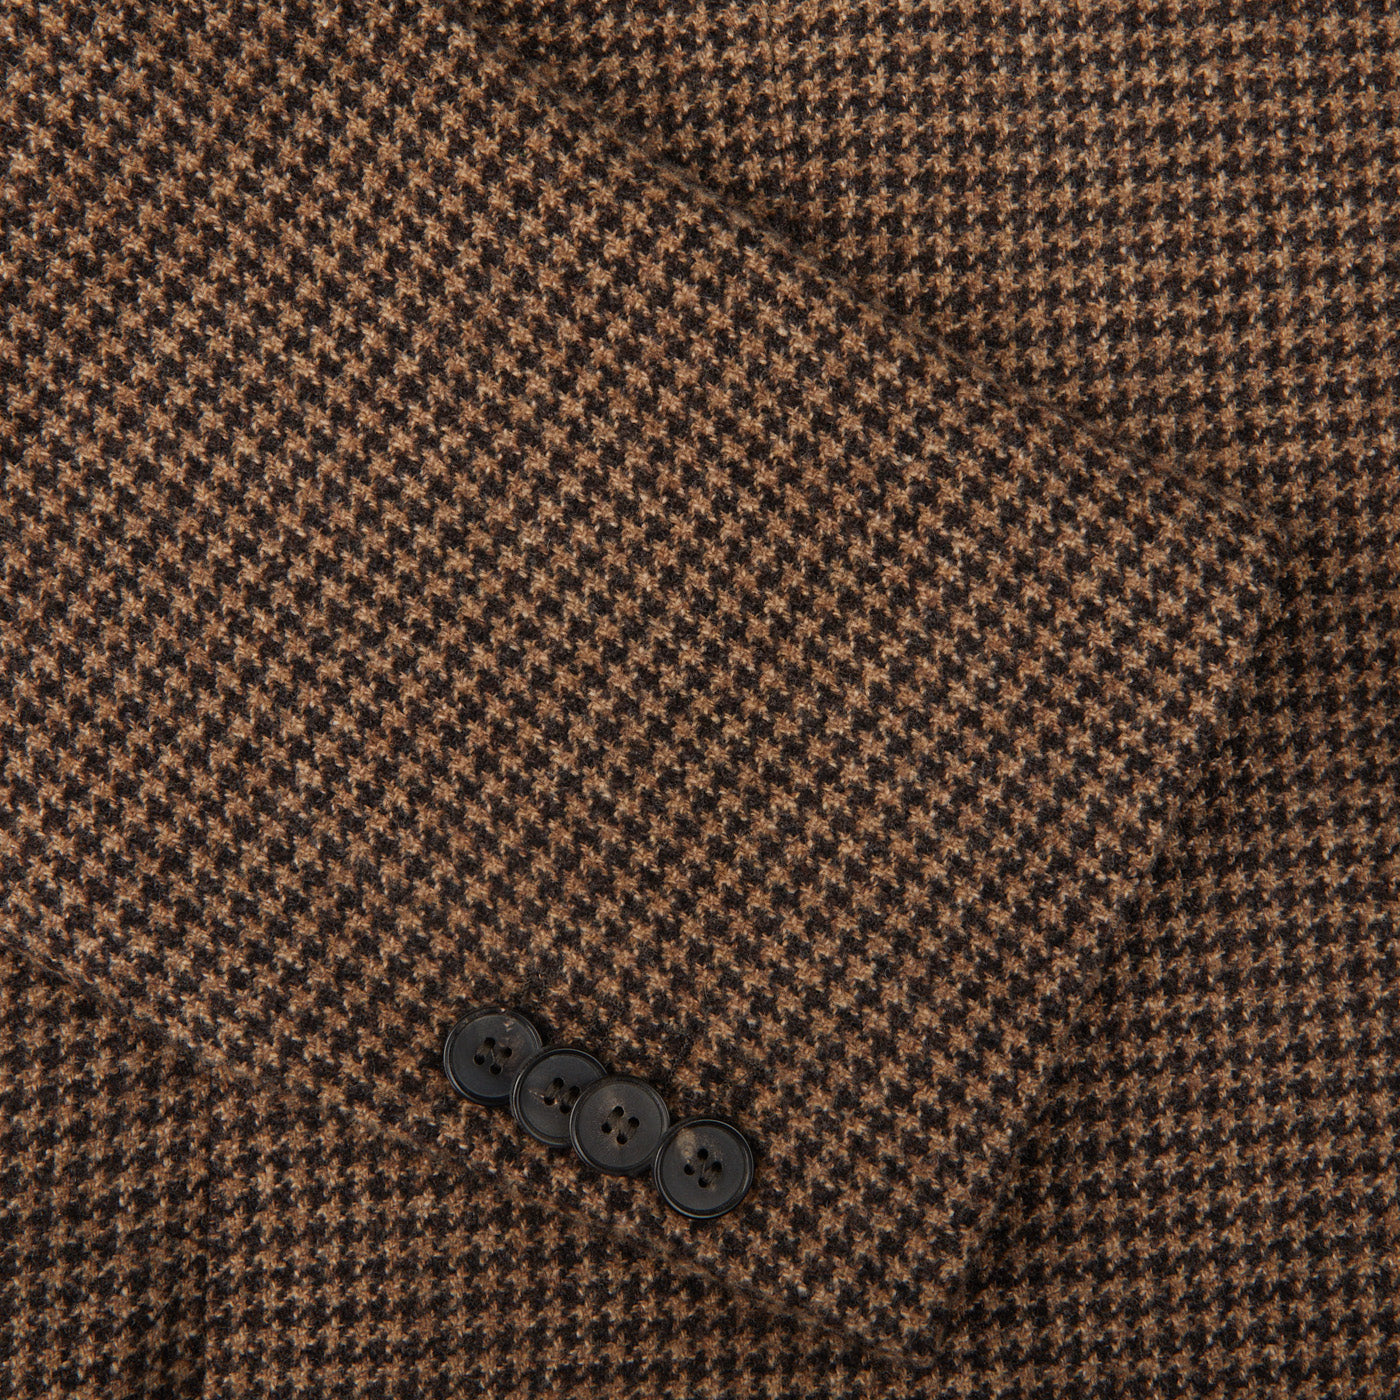 A close up of a Studio 73 Brown Houndstooth Wool Cashmere Blazer.